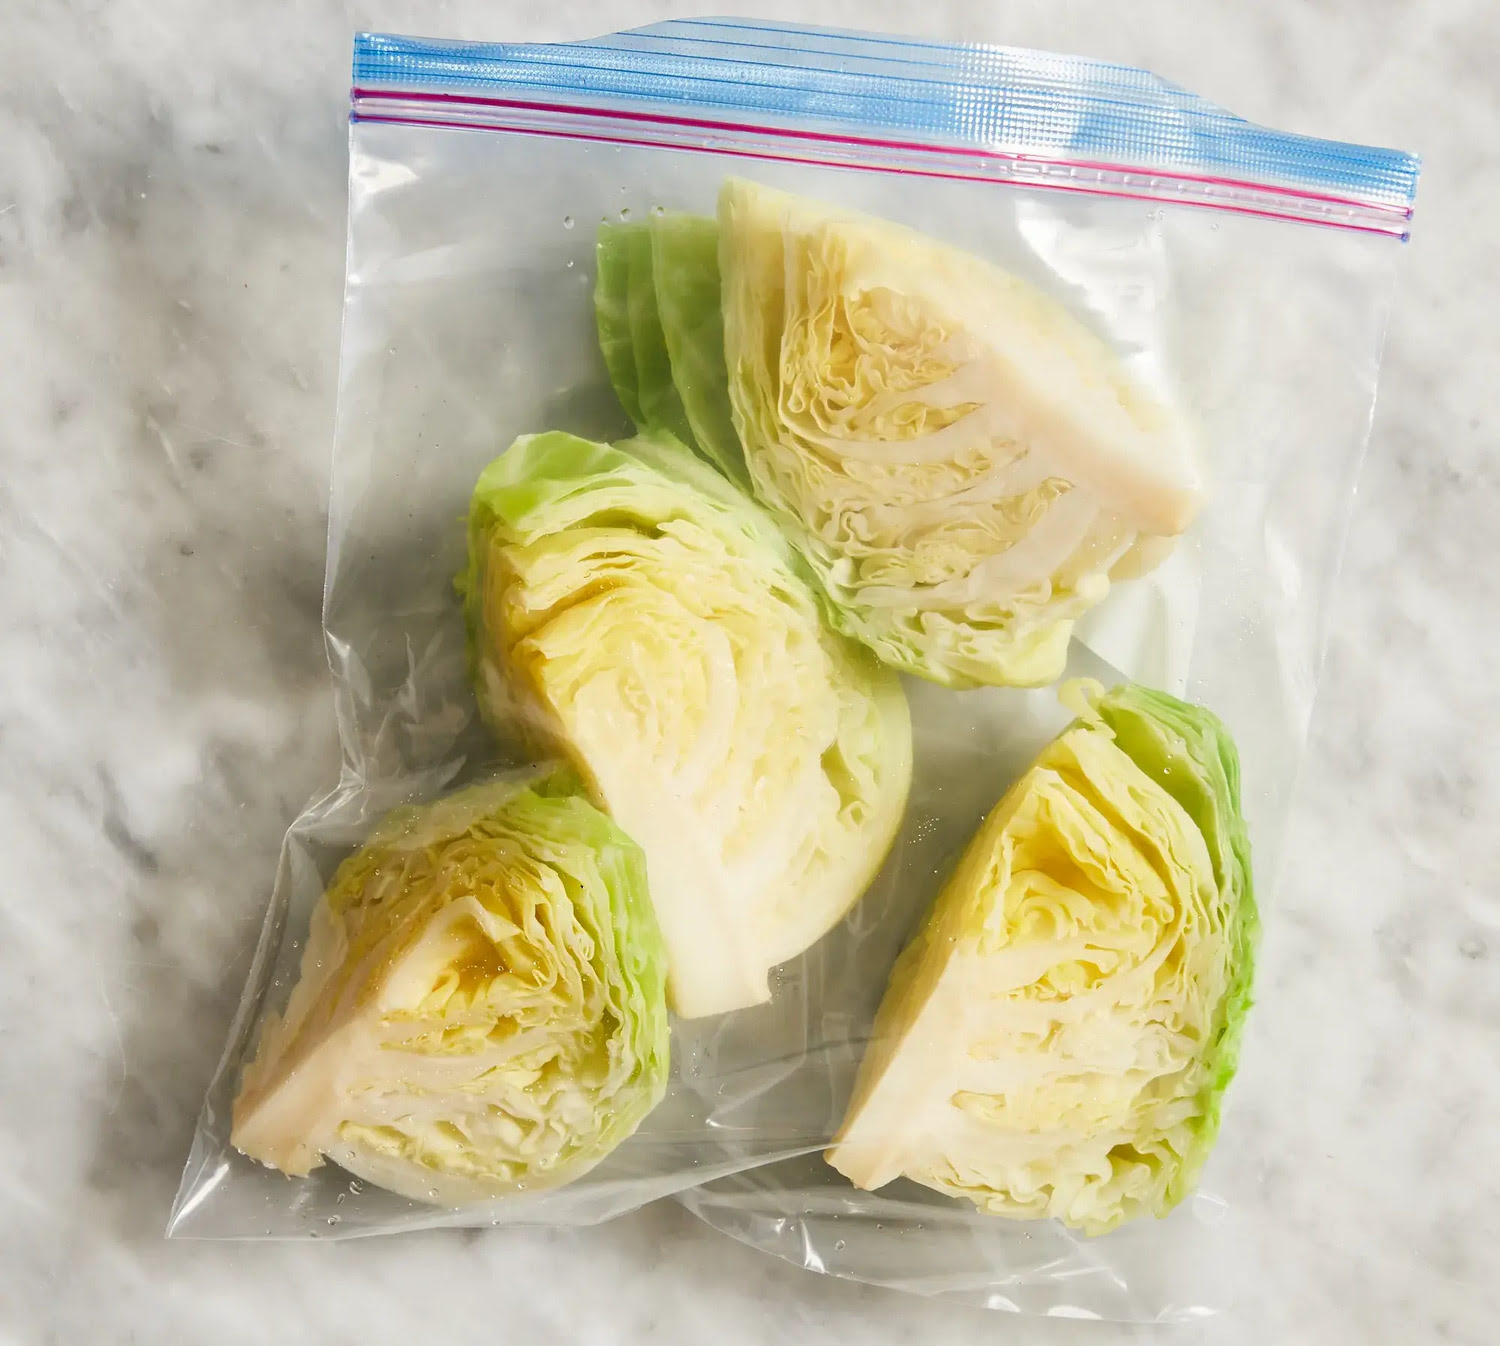 How To Store Cut Cabbage In The Refrigerator